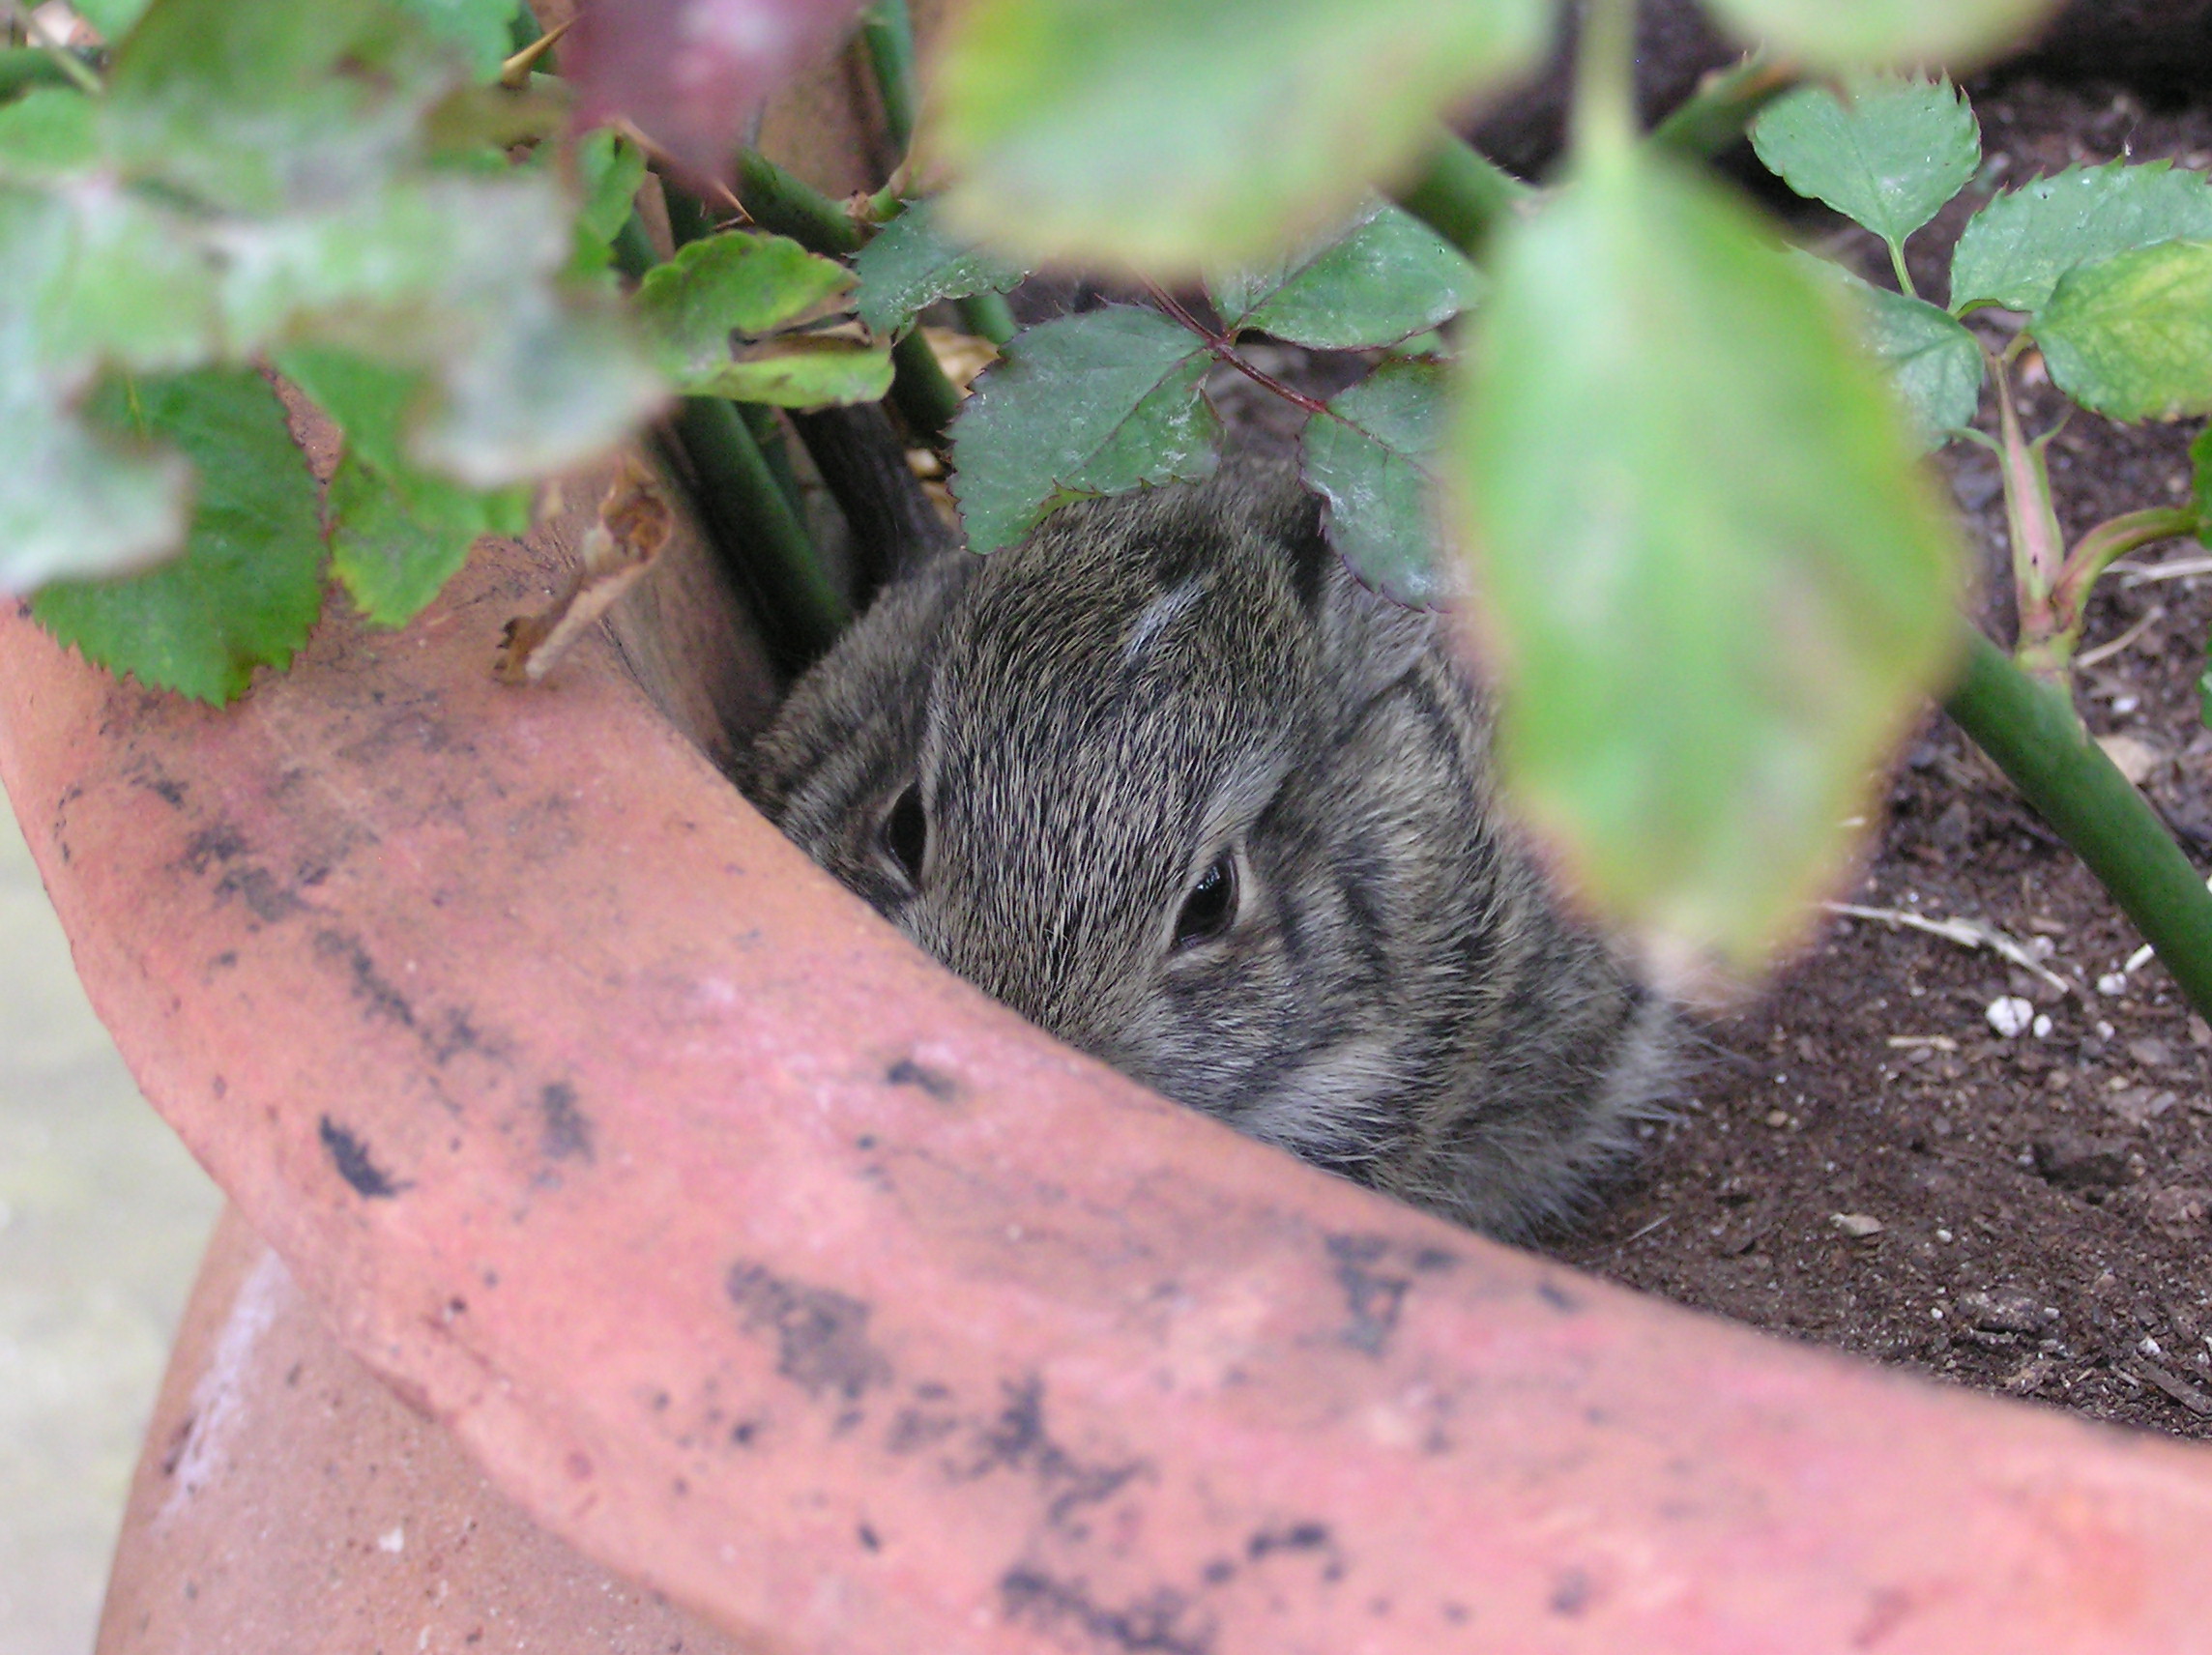 Bunny Has It Made in The Garden Shade of a Potted Rose